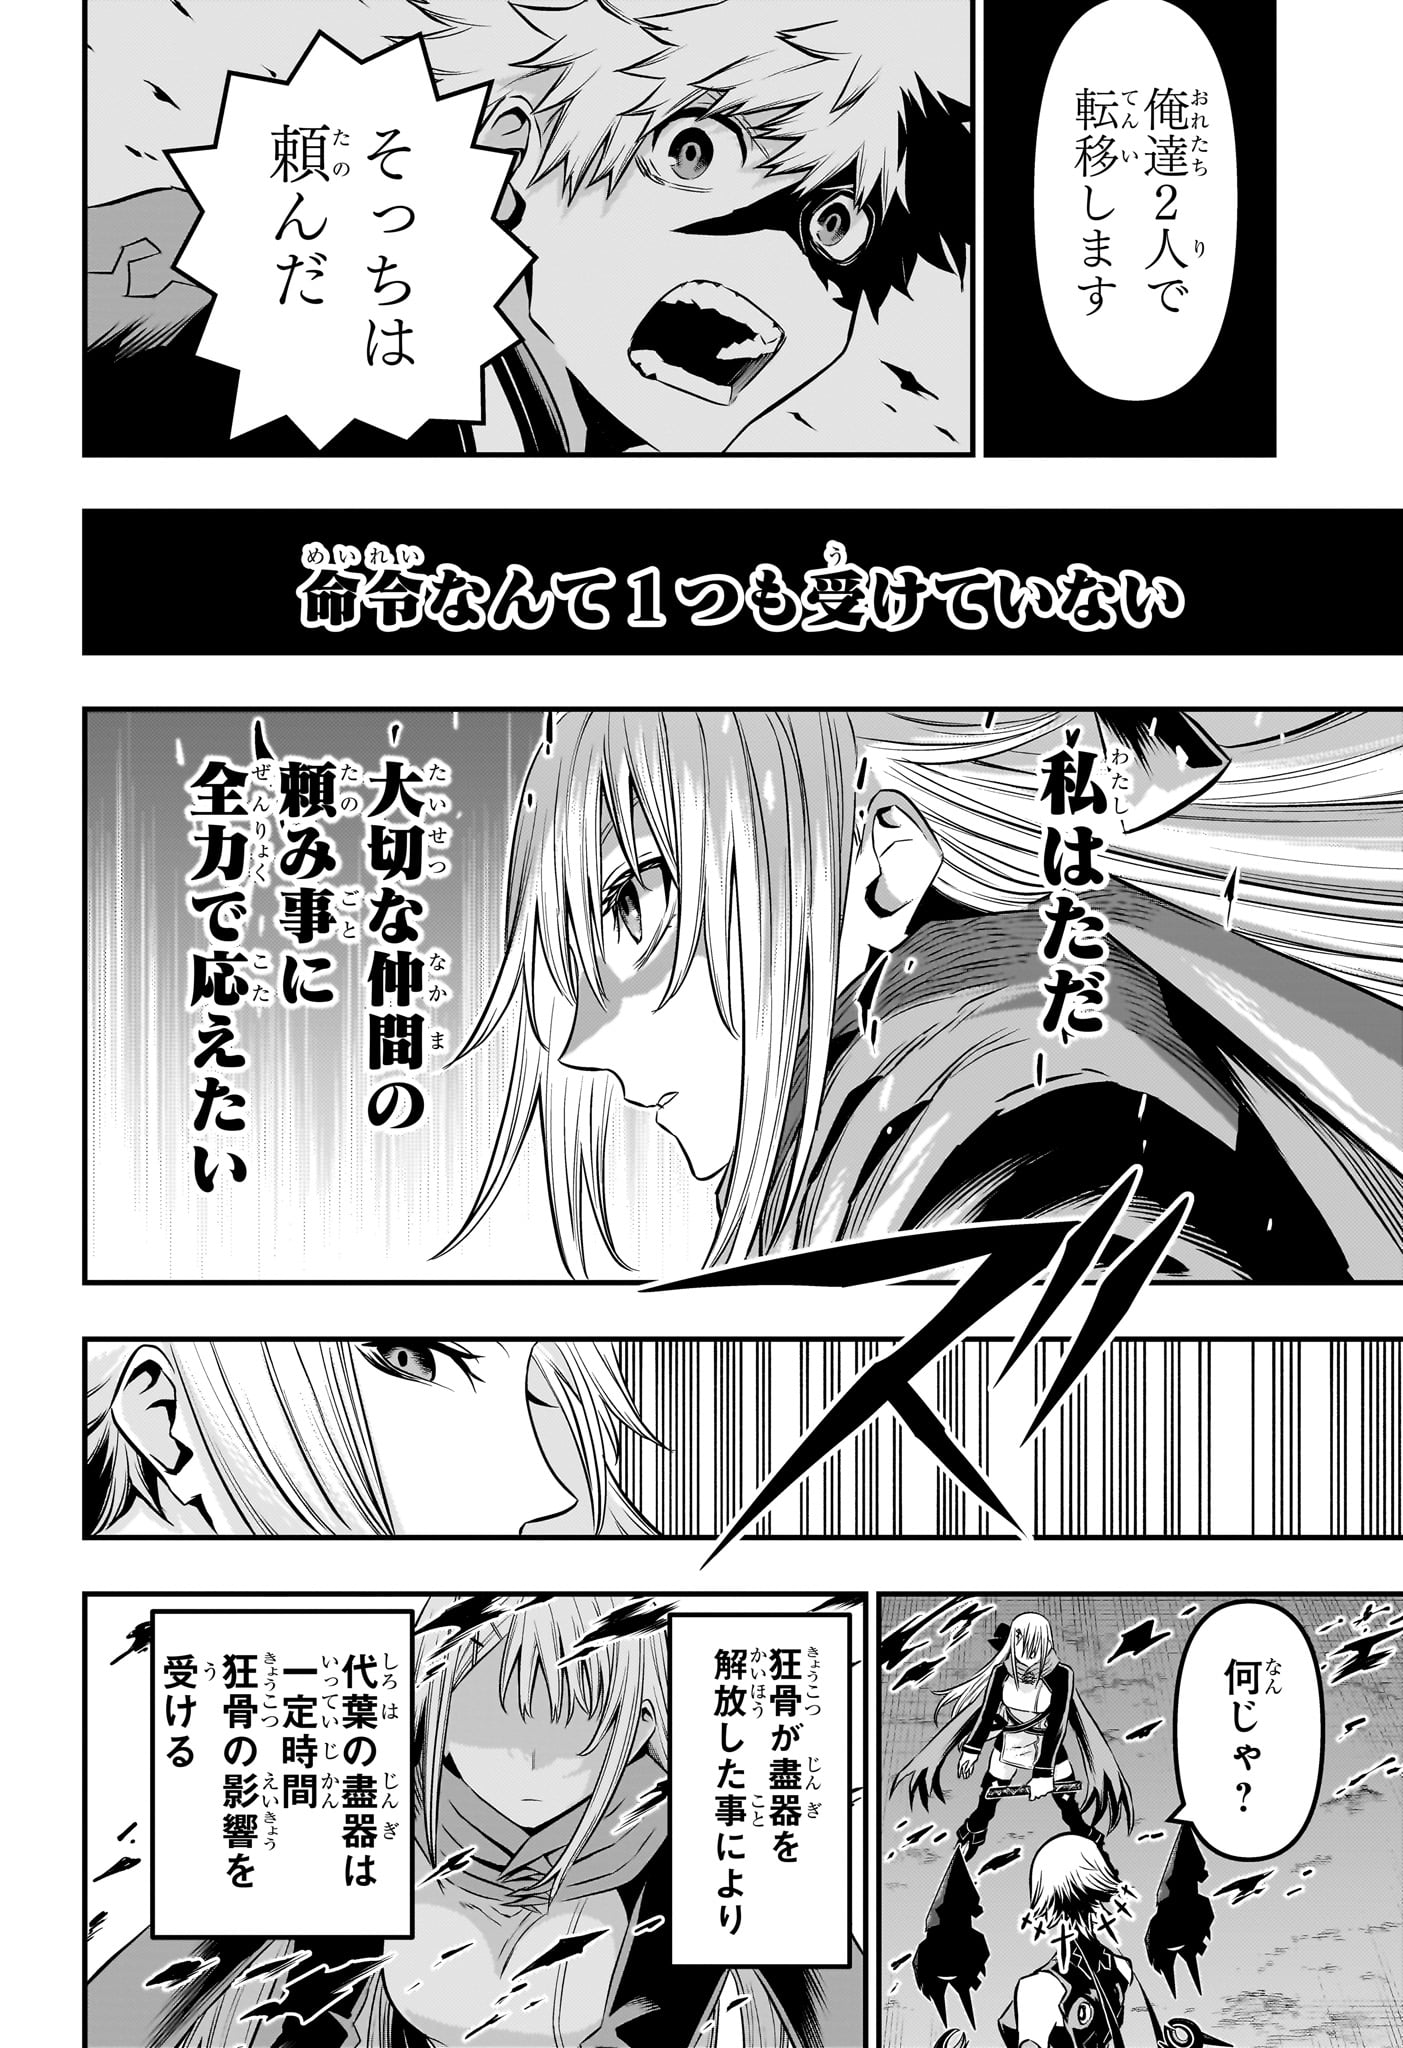 Nue no Onmyouji - Chapter 59 - Page 18